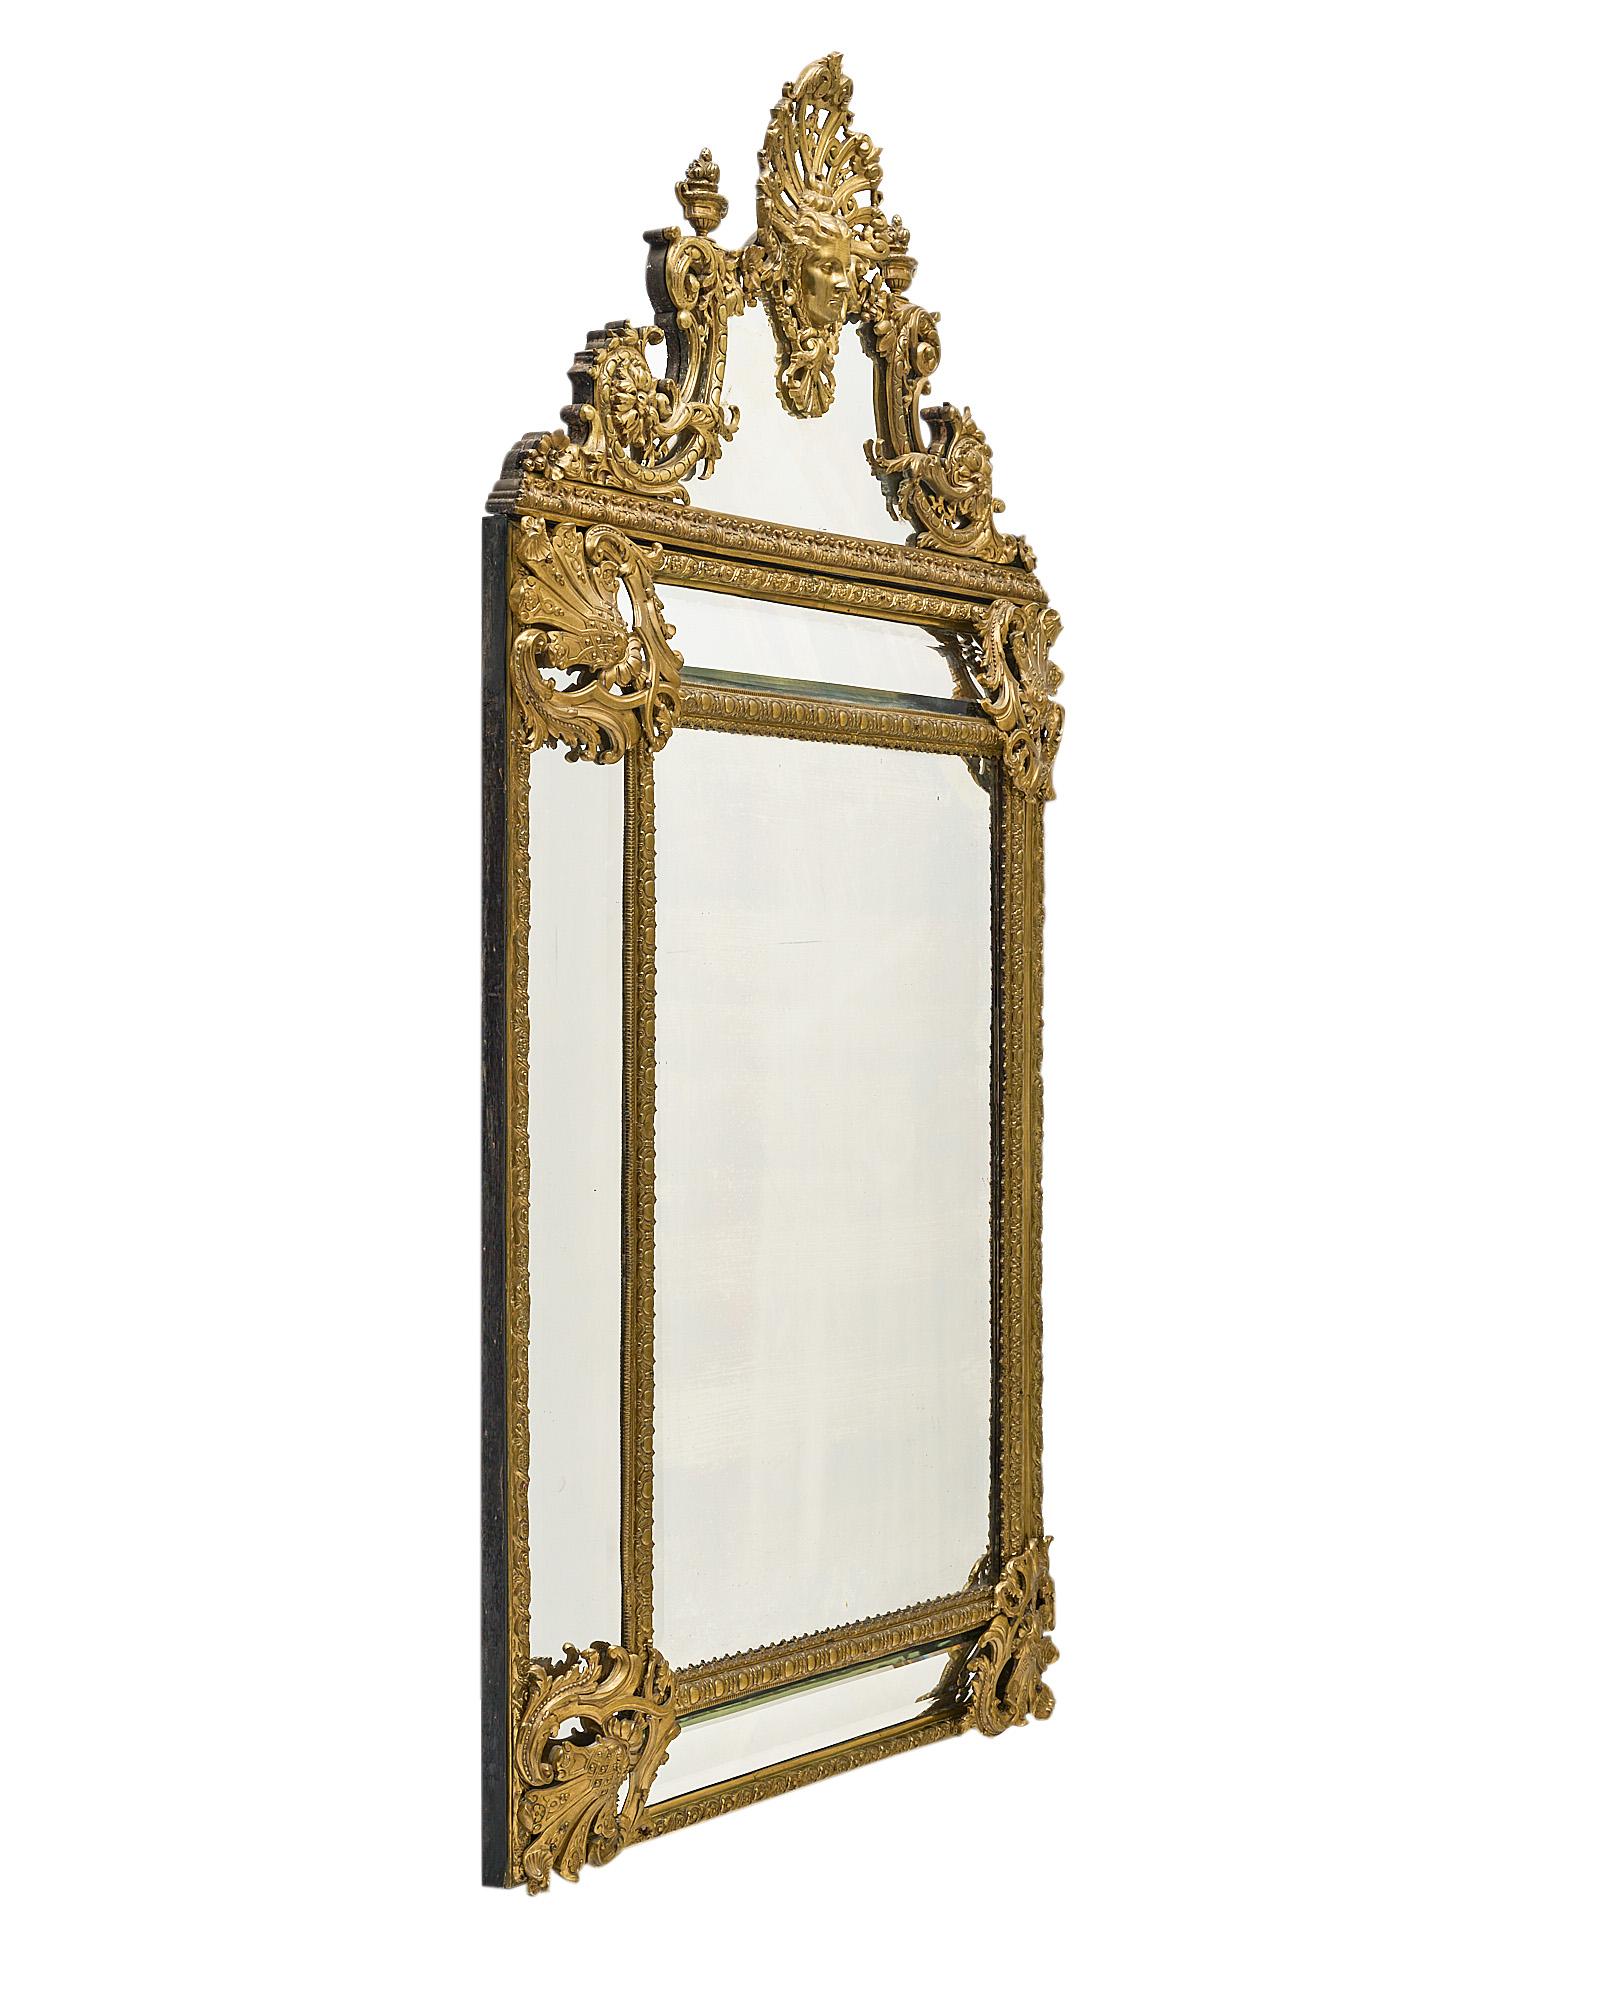 Mirror, French, from the Napoleon III period. This piece is made of finely cast bronze ormolu, with intricate decor of friezes, “godrons”, and acanthus leaves. This spectacular mirror features side compartments with the original beveled glass and a